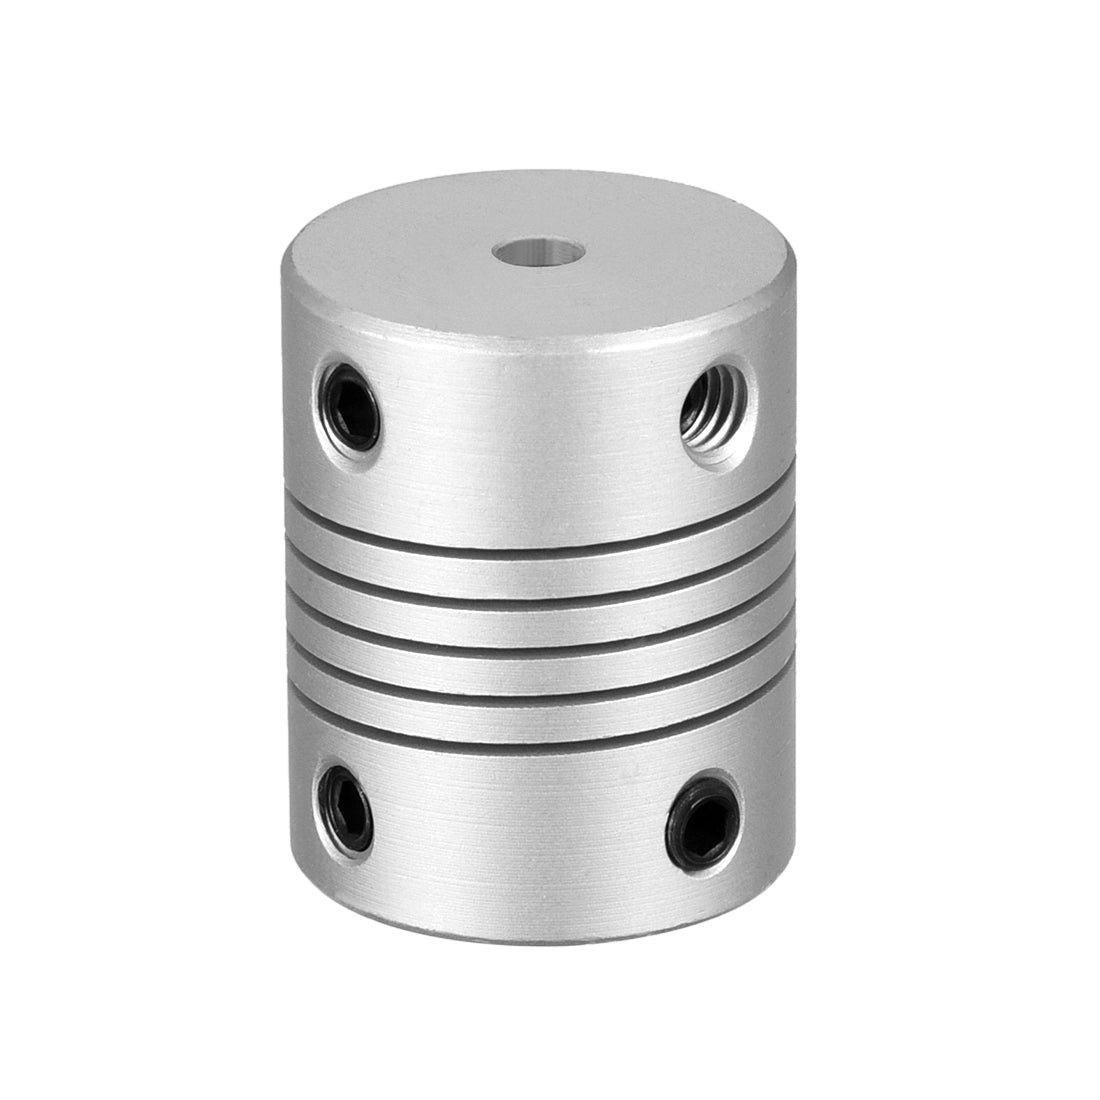 uxcell Uxcell 4mm to 4mm Aluminum Alloy Shaft Coupling Flexible Coupler Motor Connector Joint L25xD19 Silver